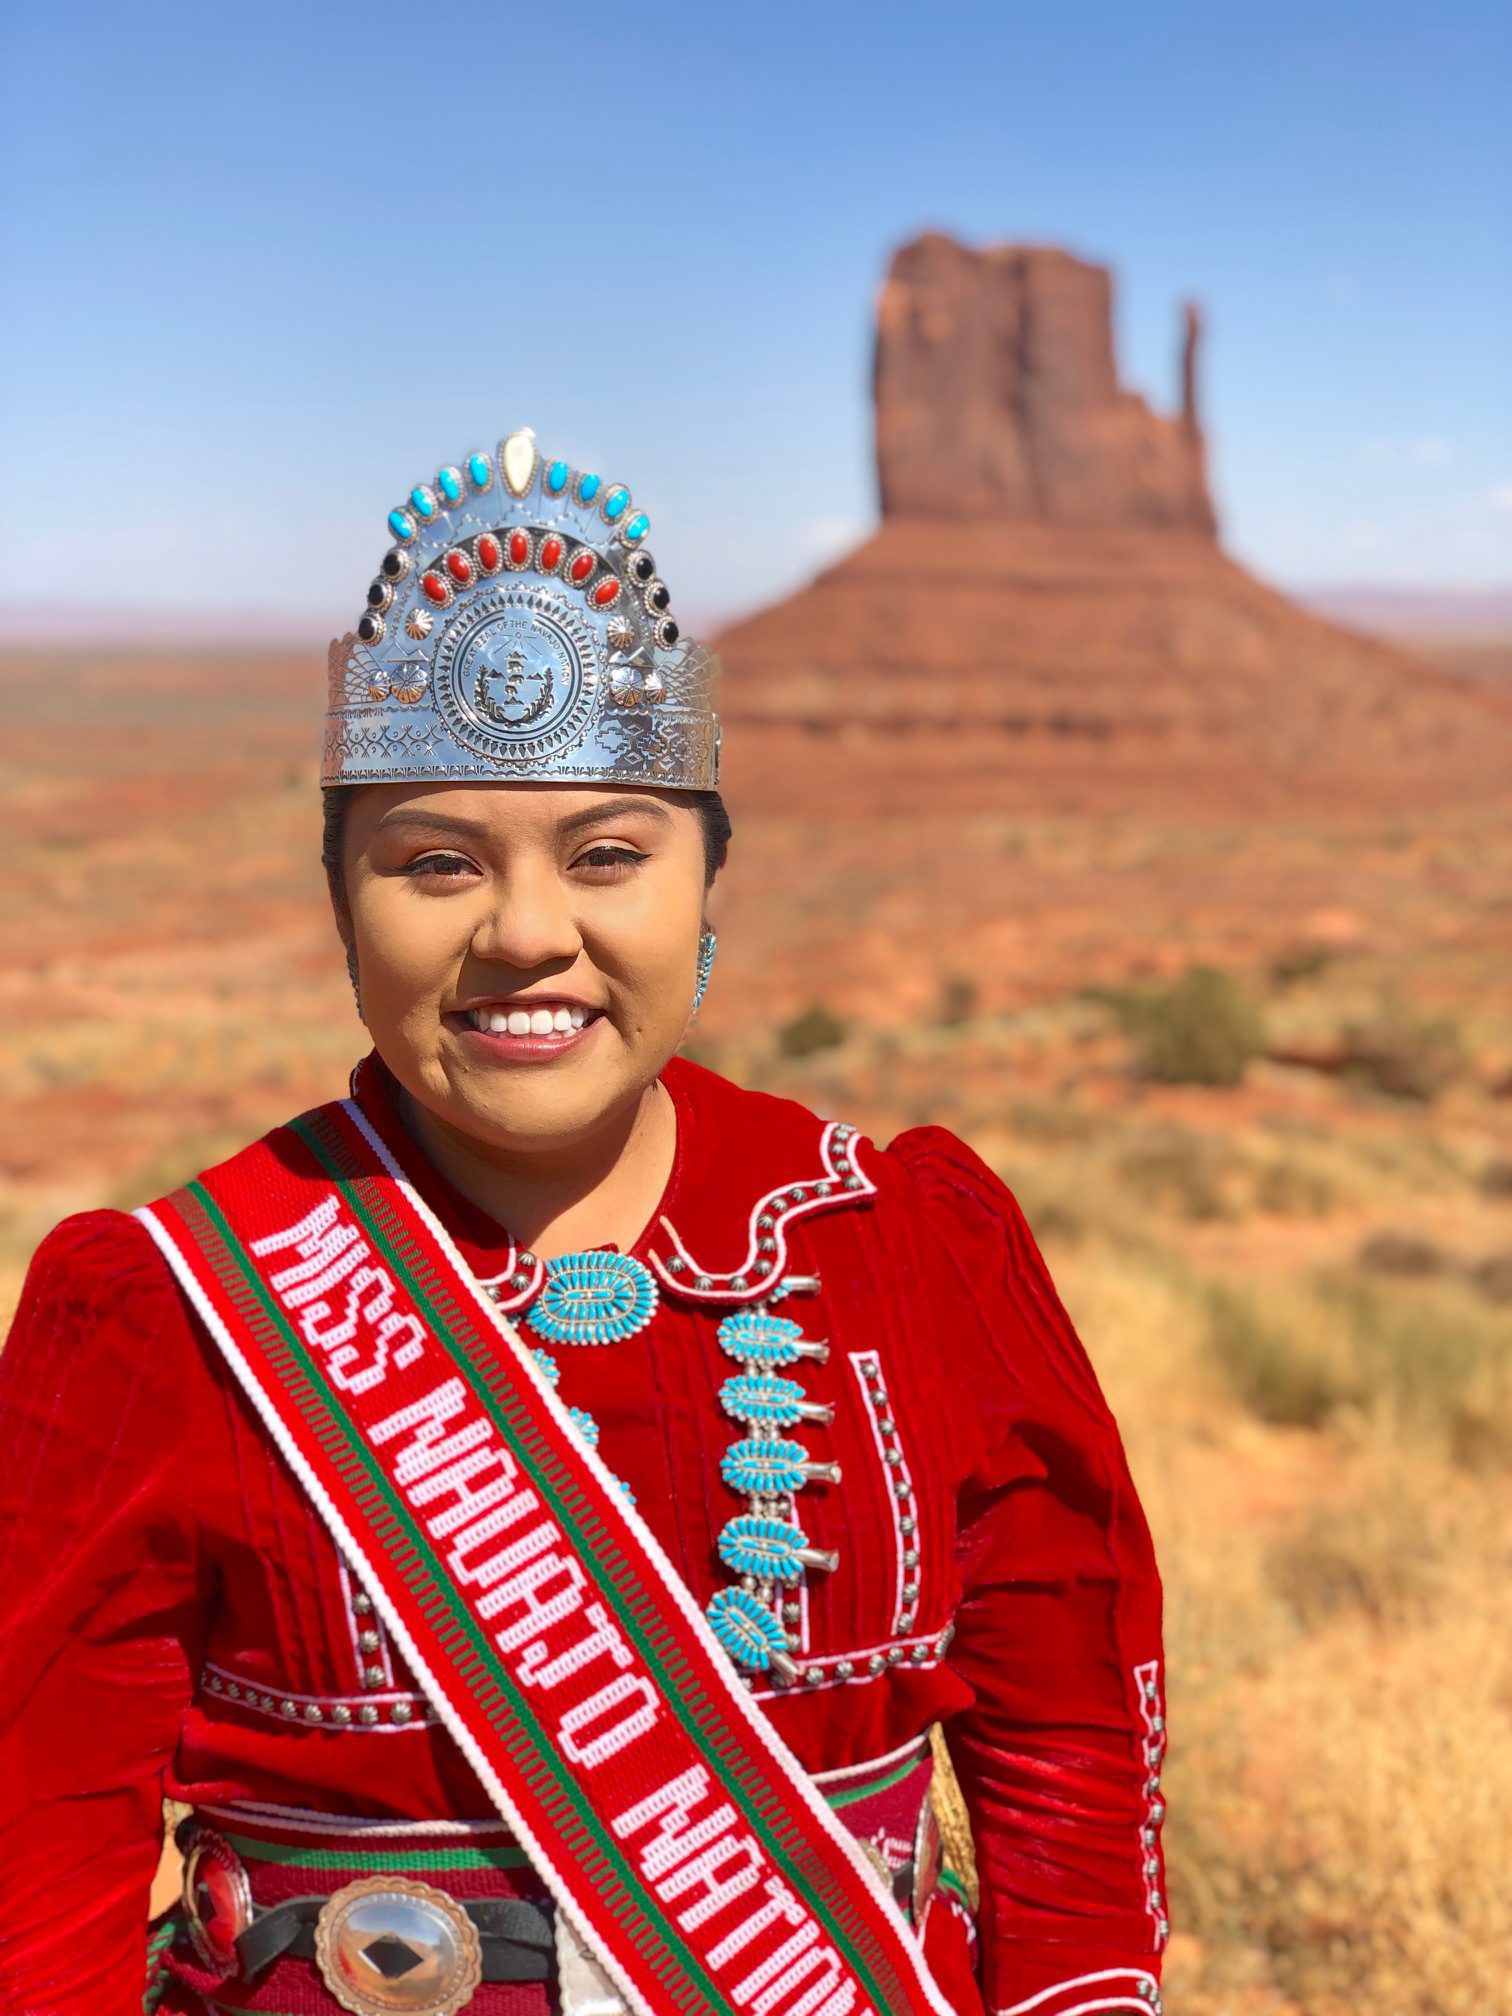 Shaandlin Parrish as Miss Navajo Nation in front of a natural monument in the desert.